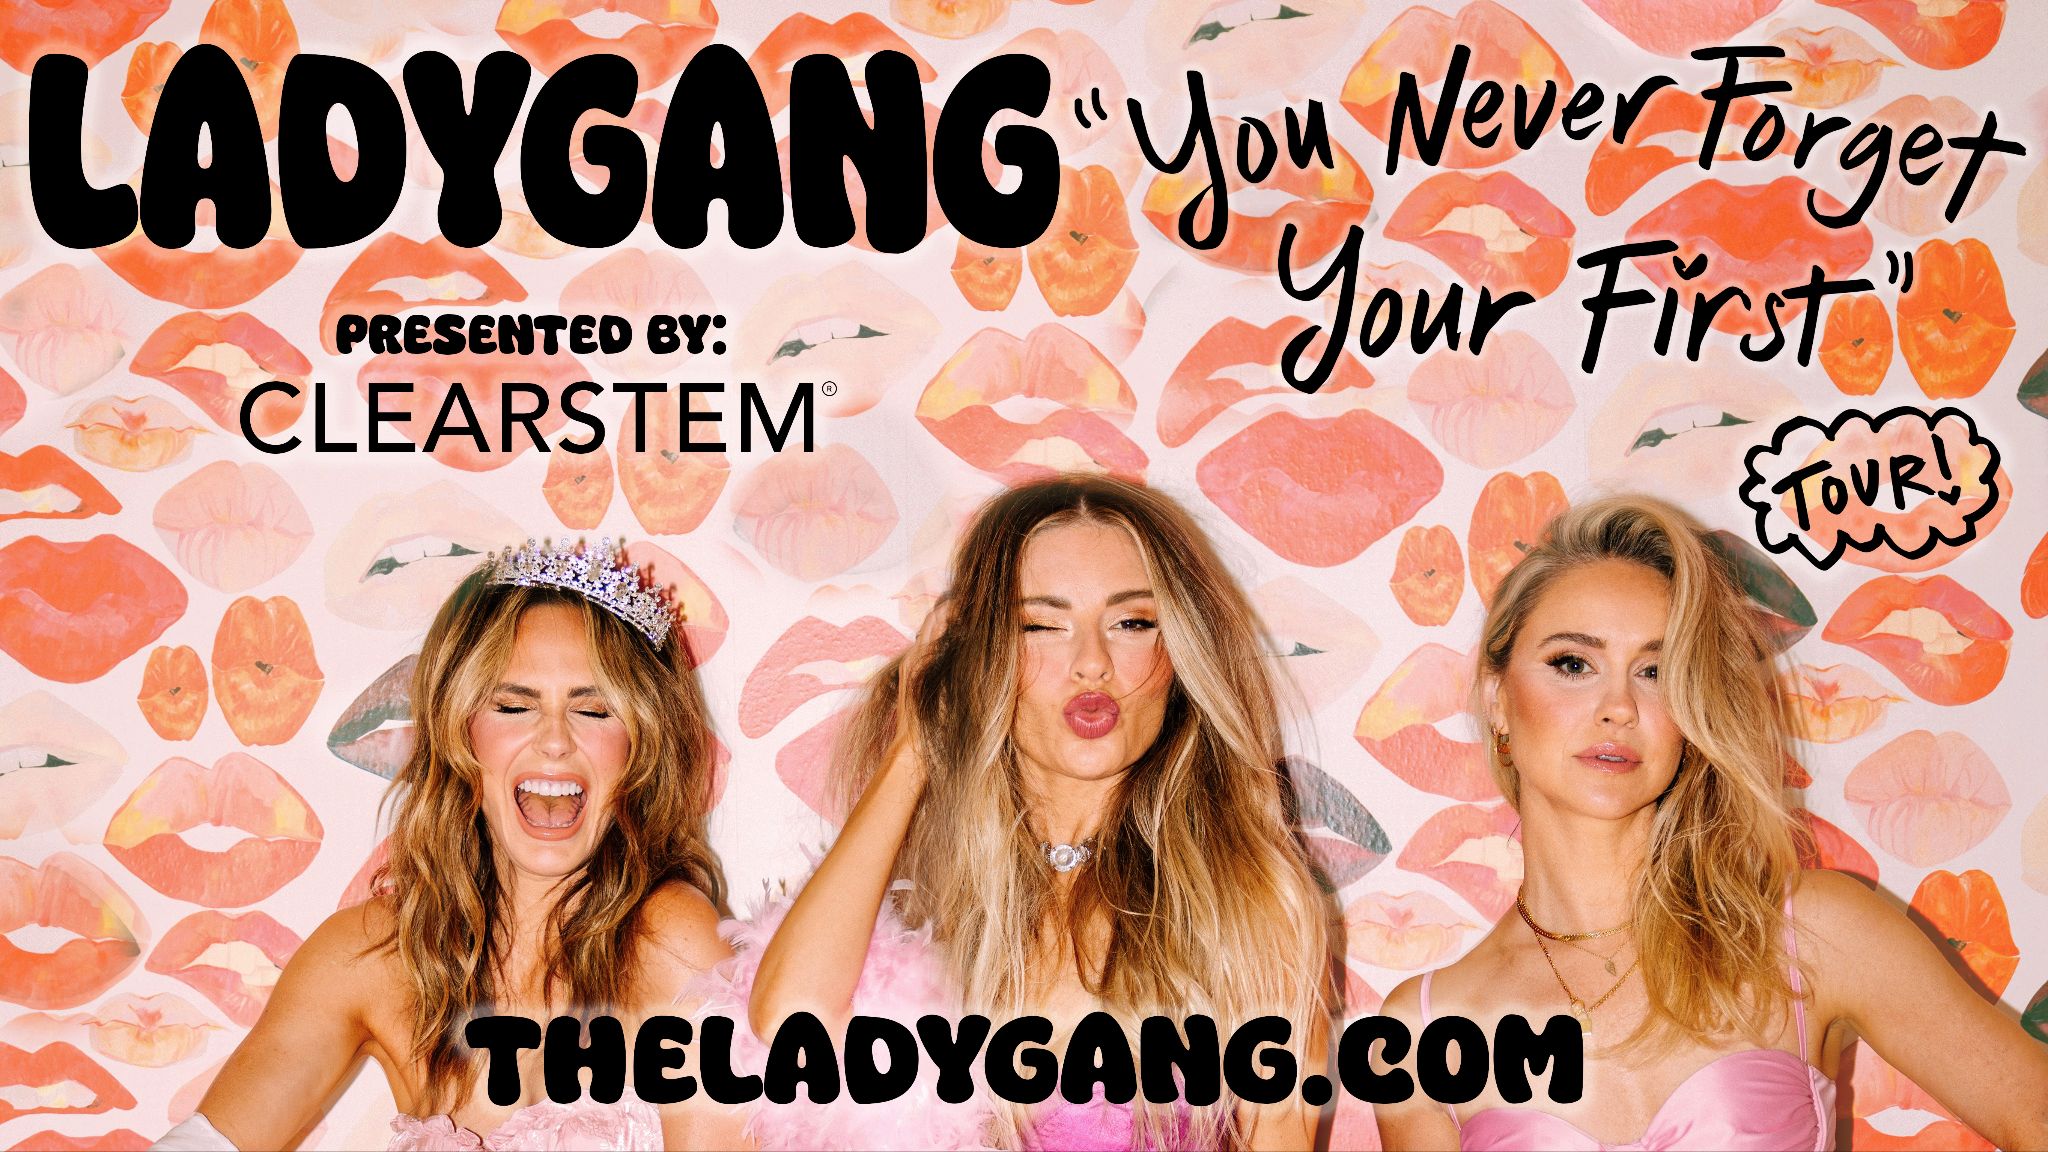 LADYGANG "You Never Forget Your First" Tour